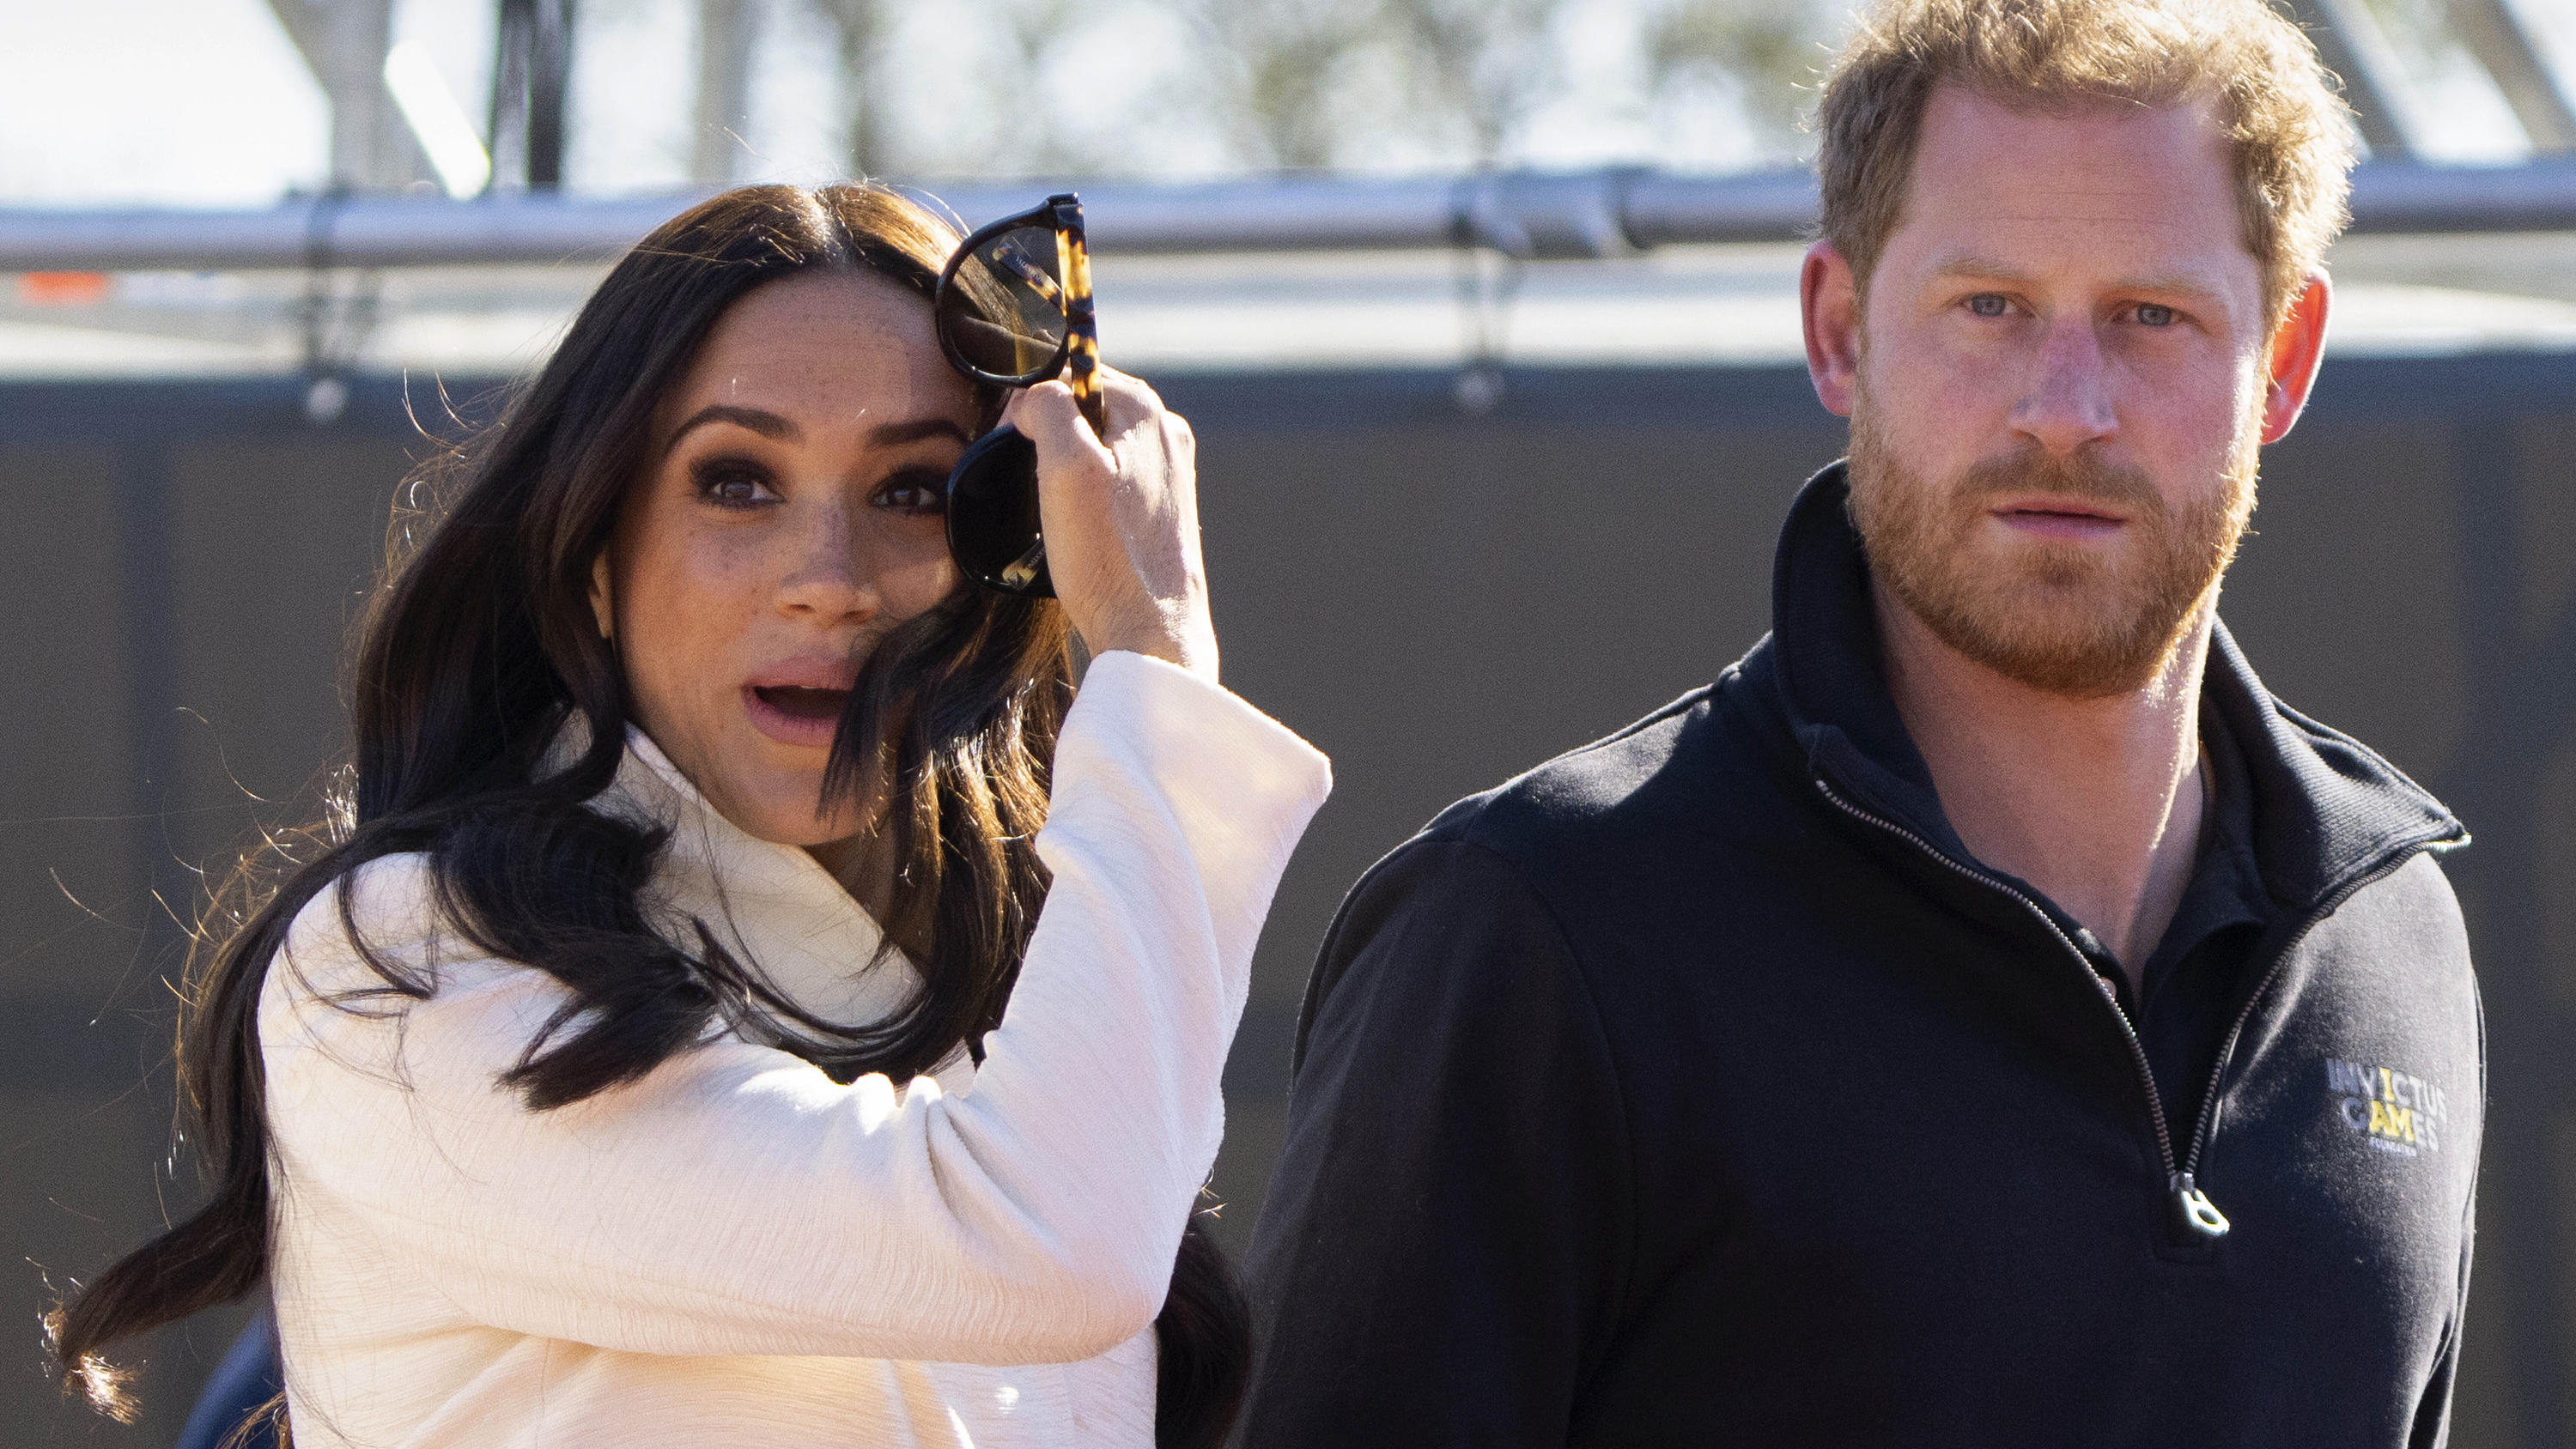 FILE - Prince Harry and Meghan Markle, Duke and Duchess of Sussex visit the track and field event at the Invictus Games in The Hague, Netherlands, Sunday, April 17, 2022.  A spokesperson for Prince Harry and his wife Meghan says the couple were invol